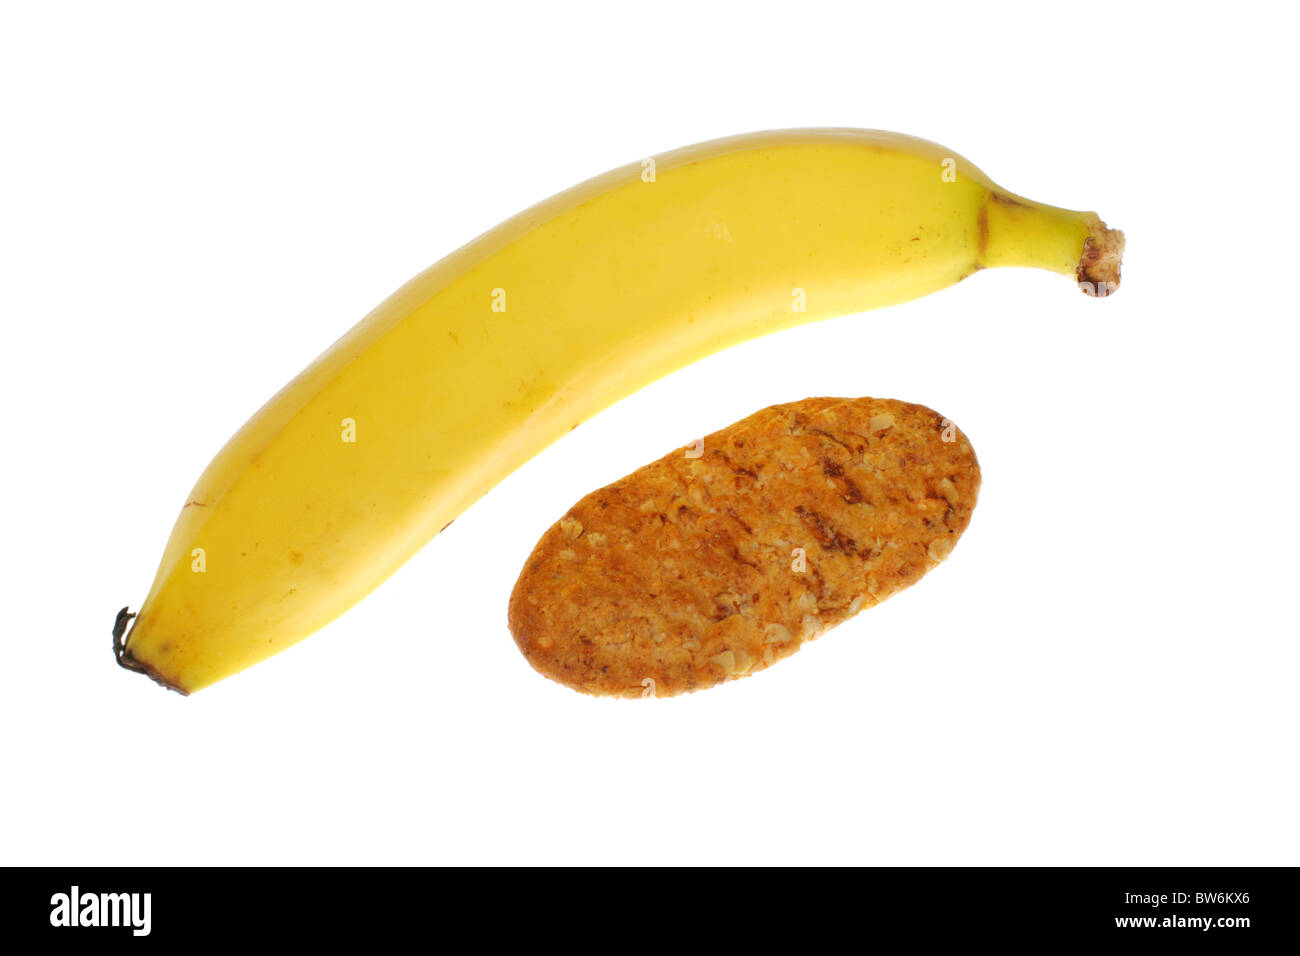 Banana and Cereal Biscuit Stock Photo